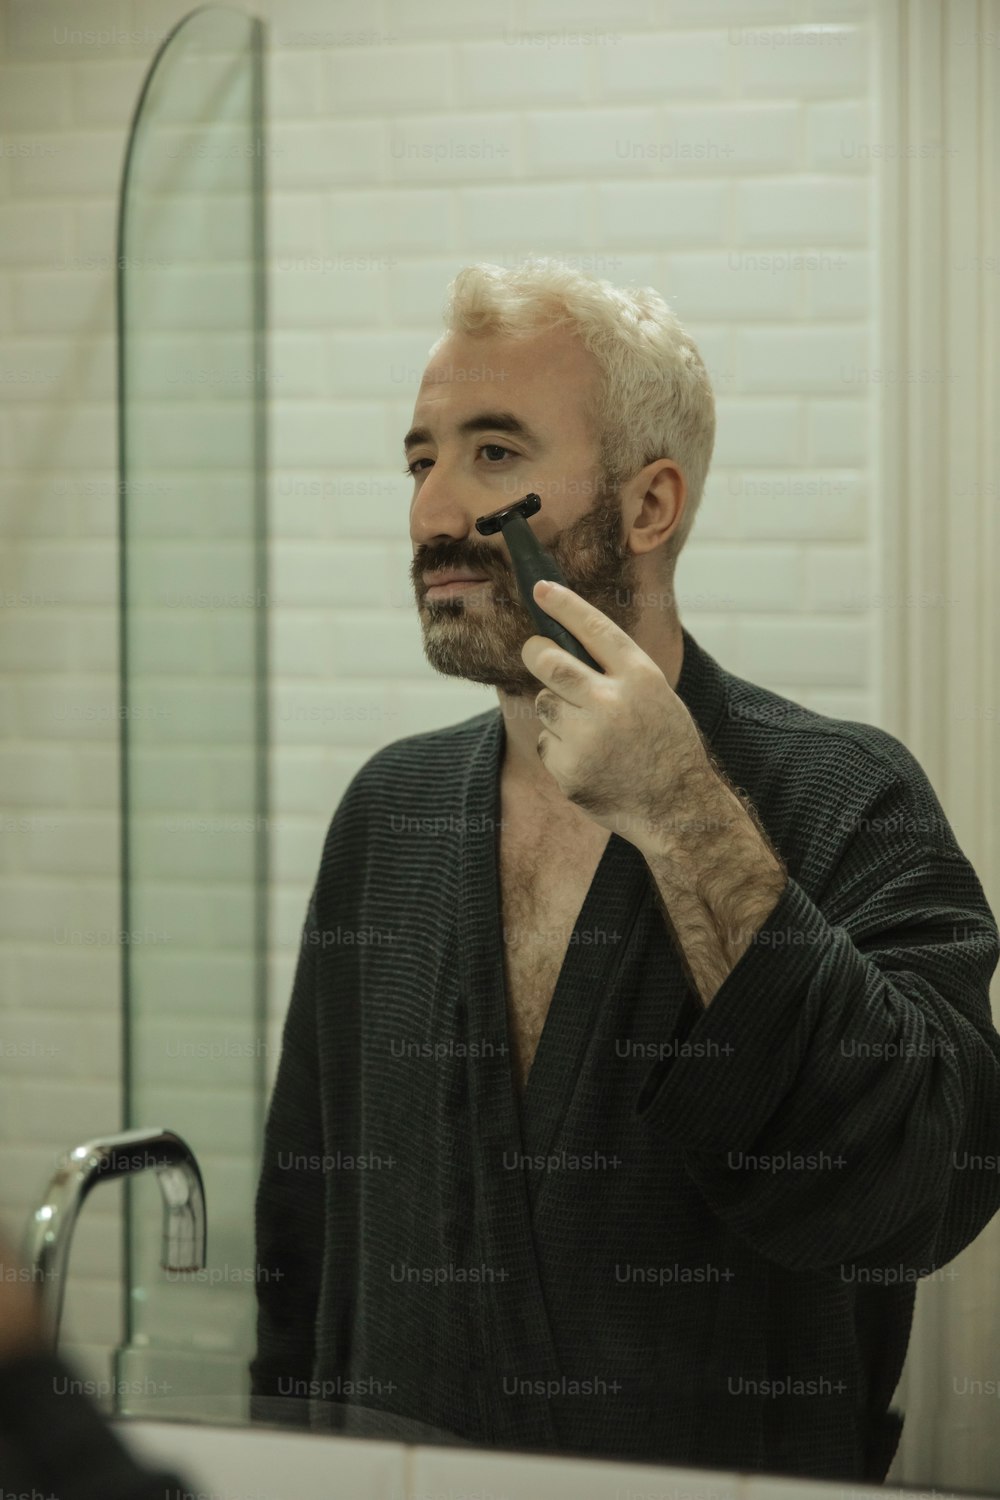 a man is shaving his face in front of a mirror